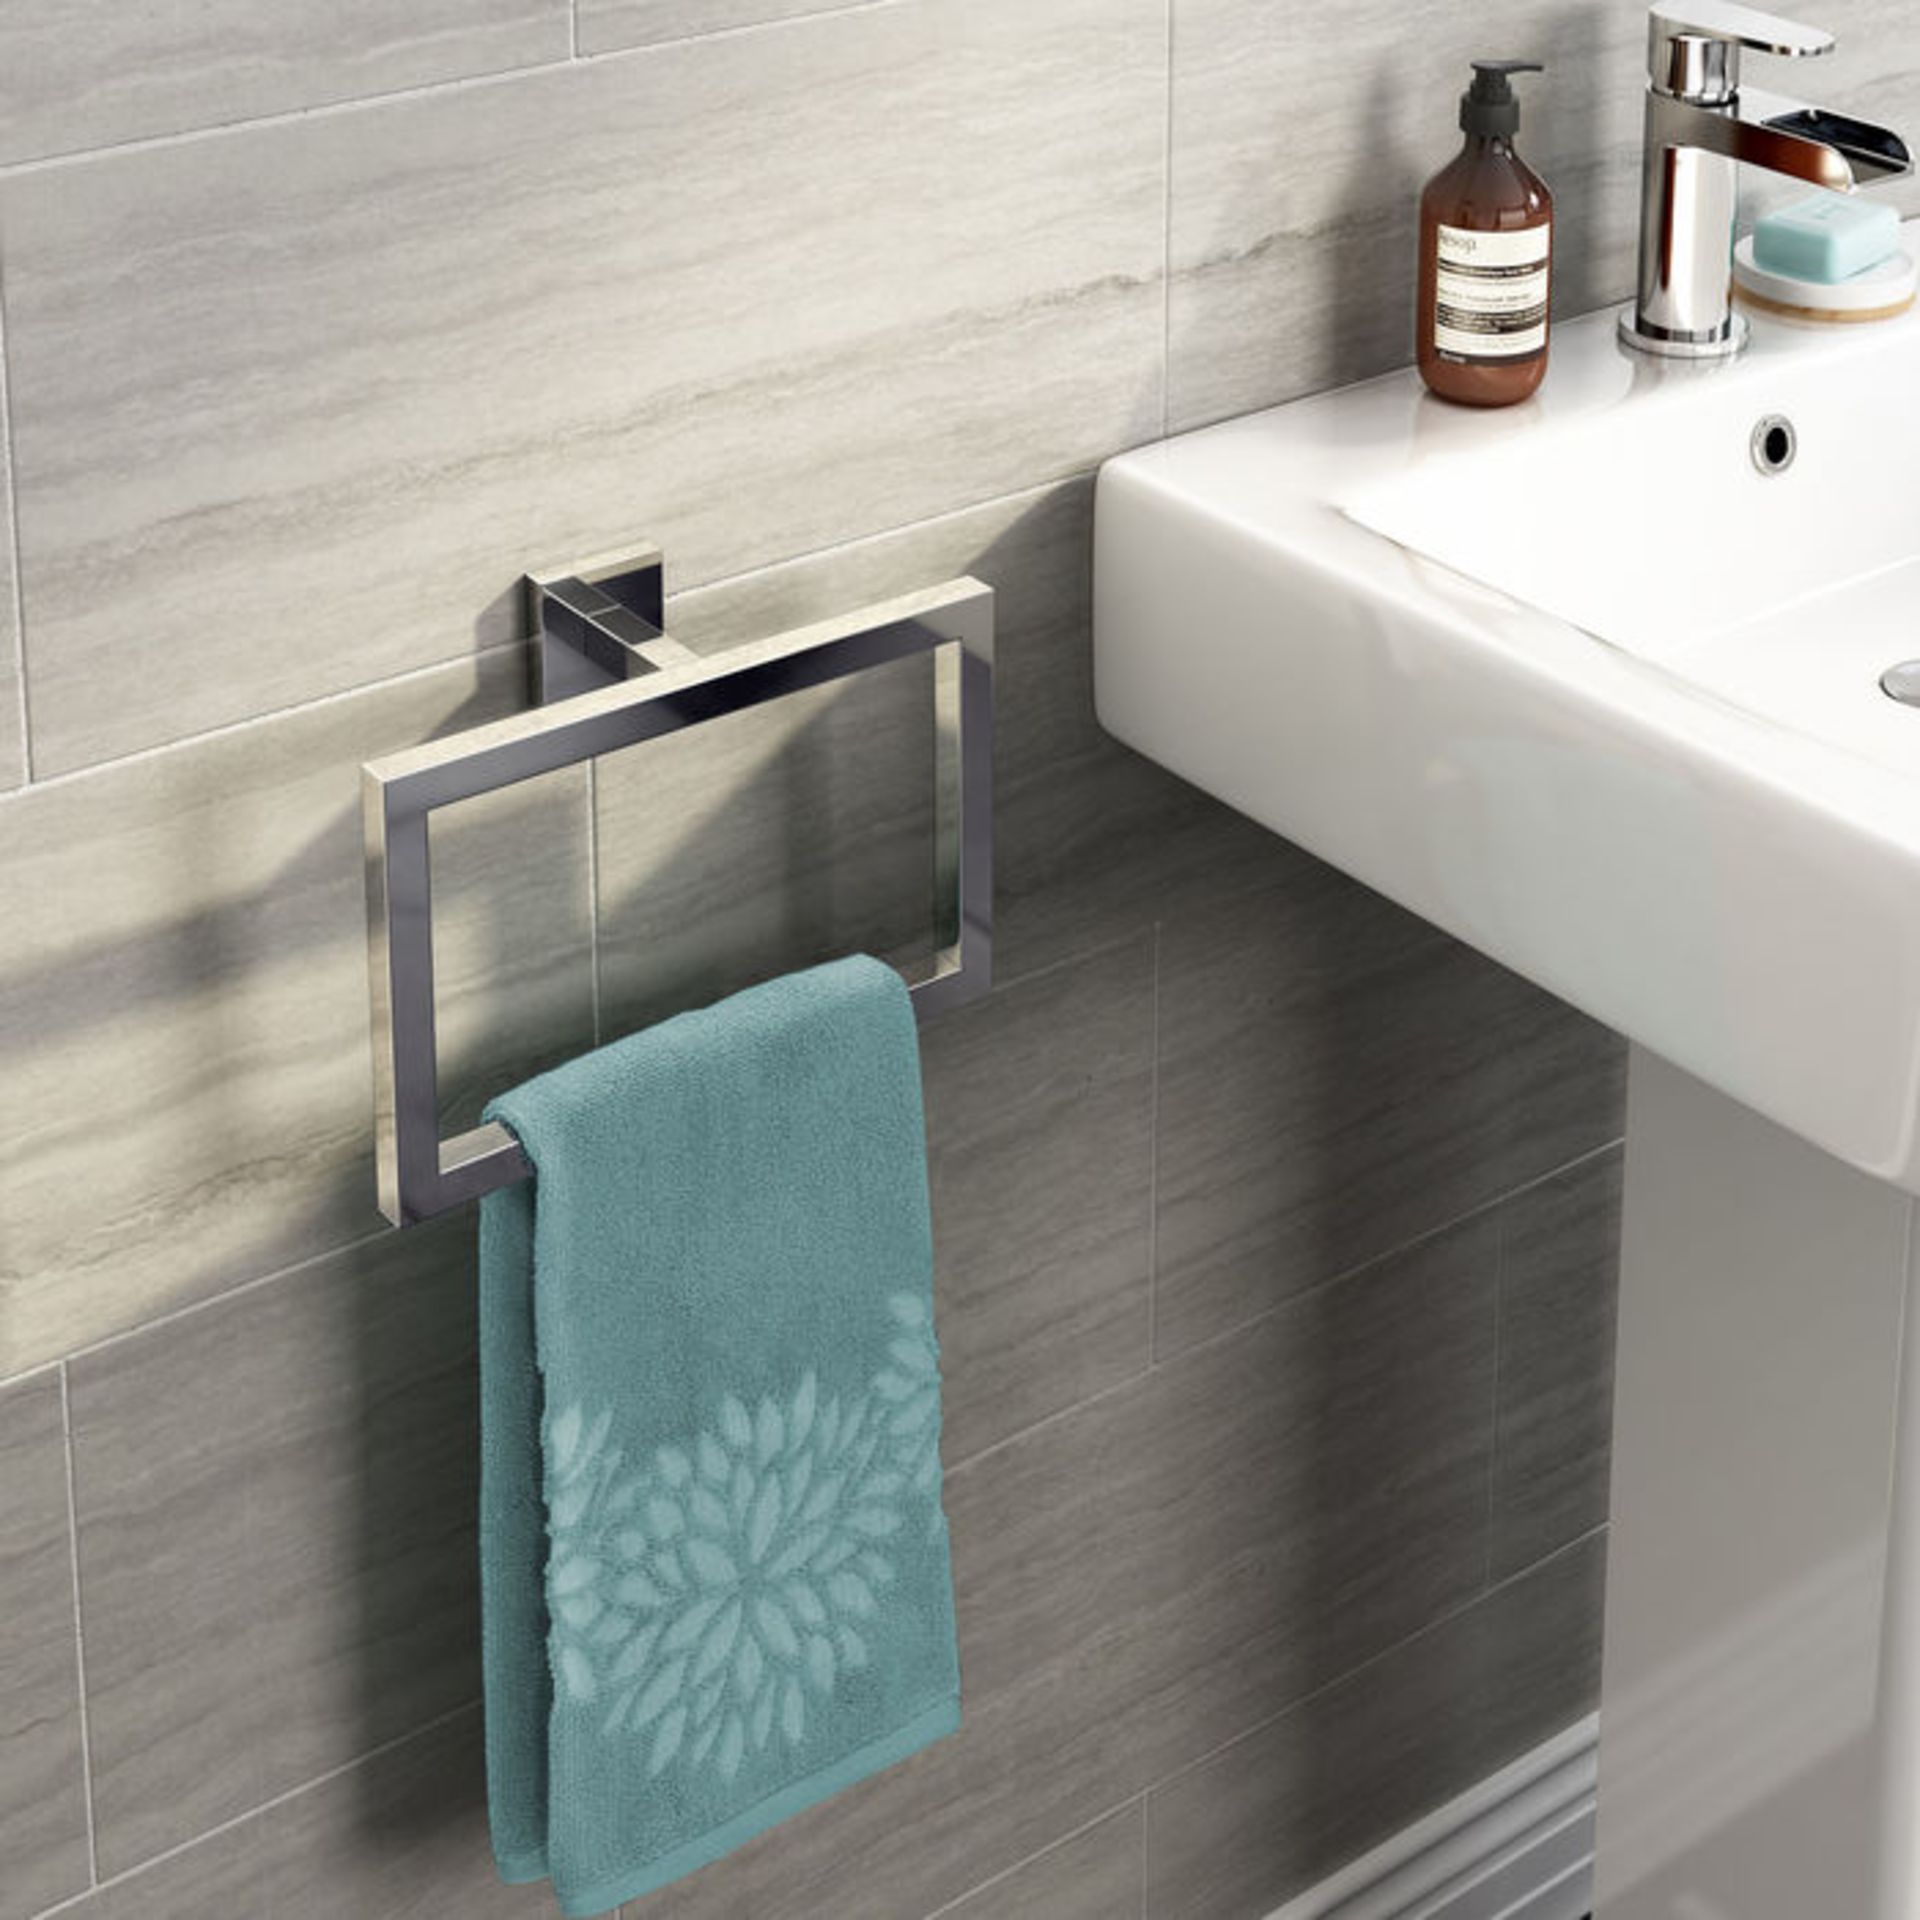 (AL35) Jesmond Towel Ring. Finishes your bathroom with a little extra functionality and style Made - Image 3 of 3